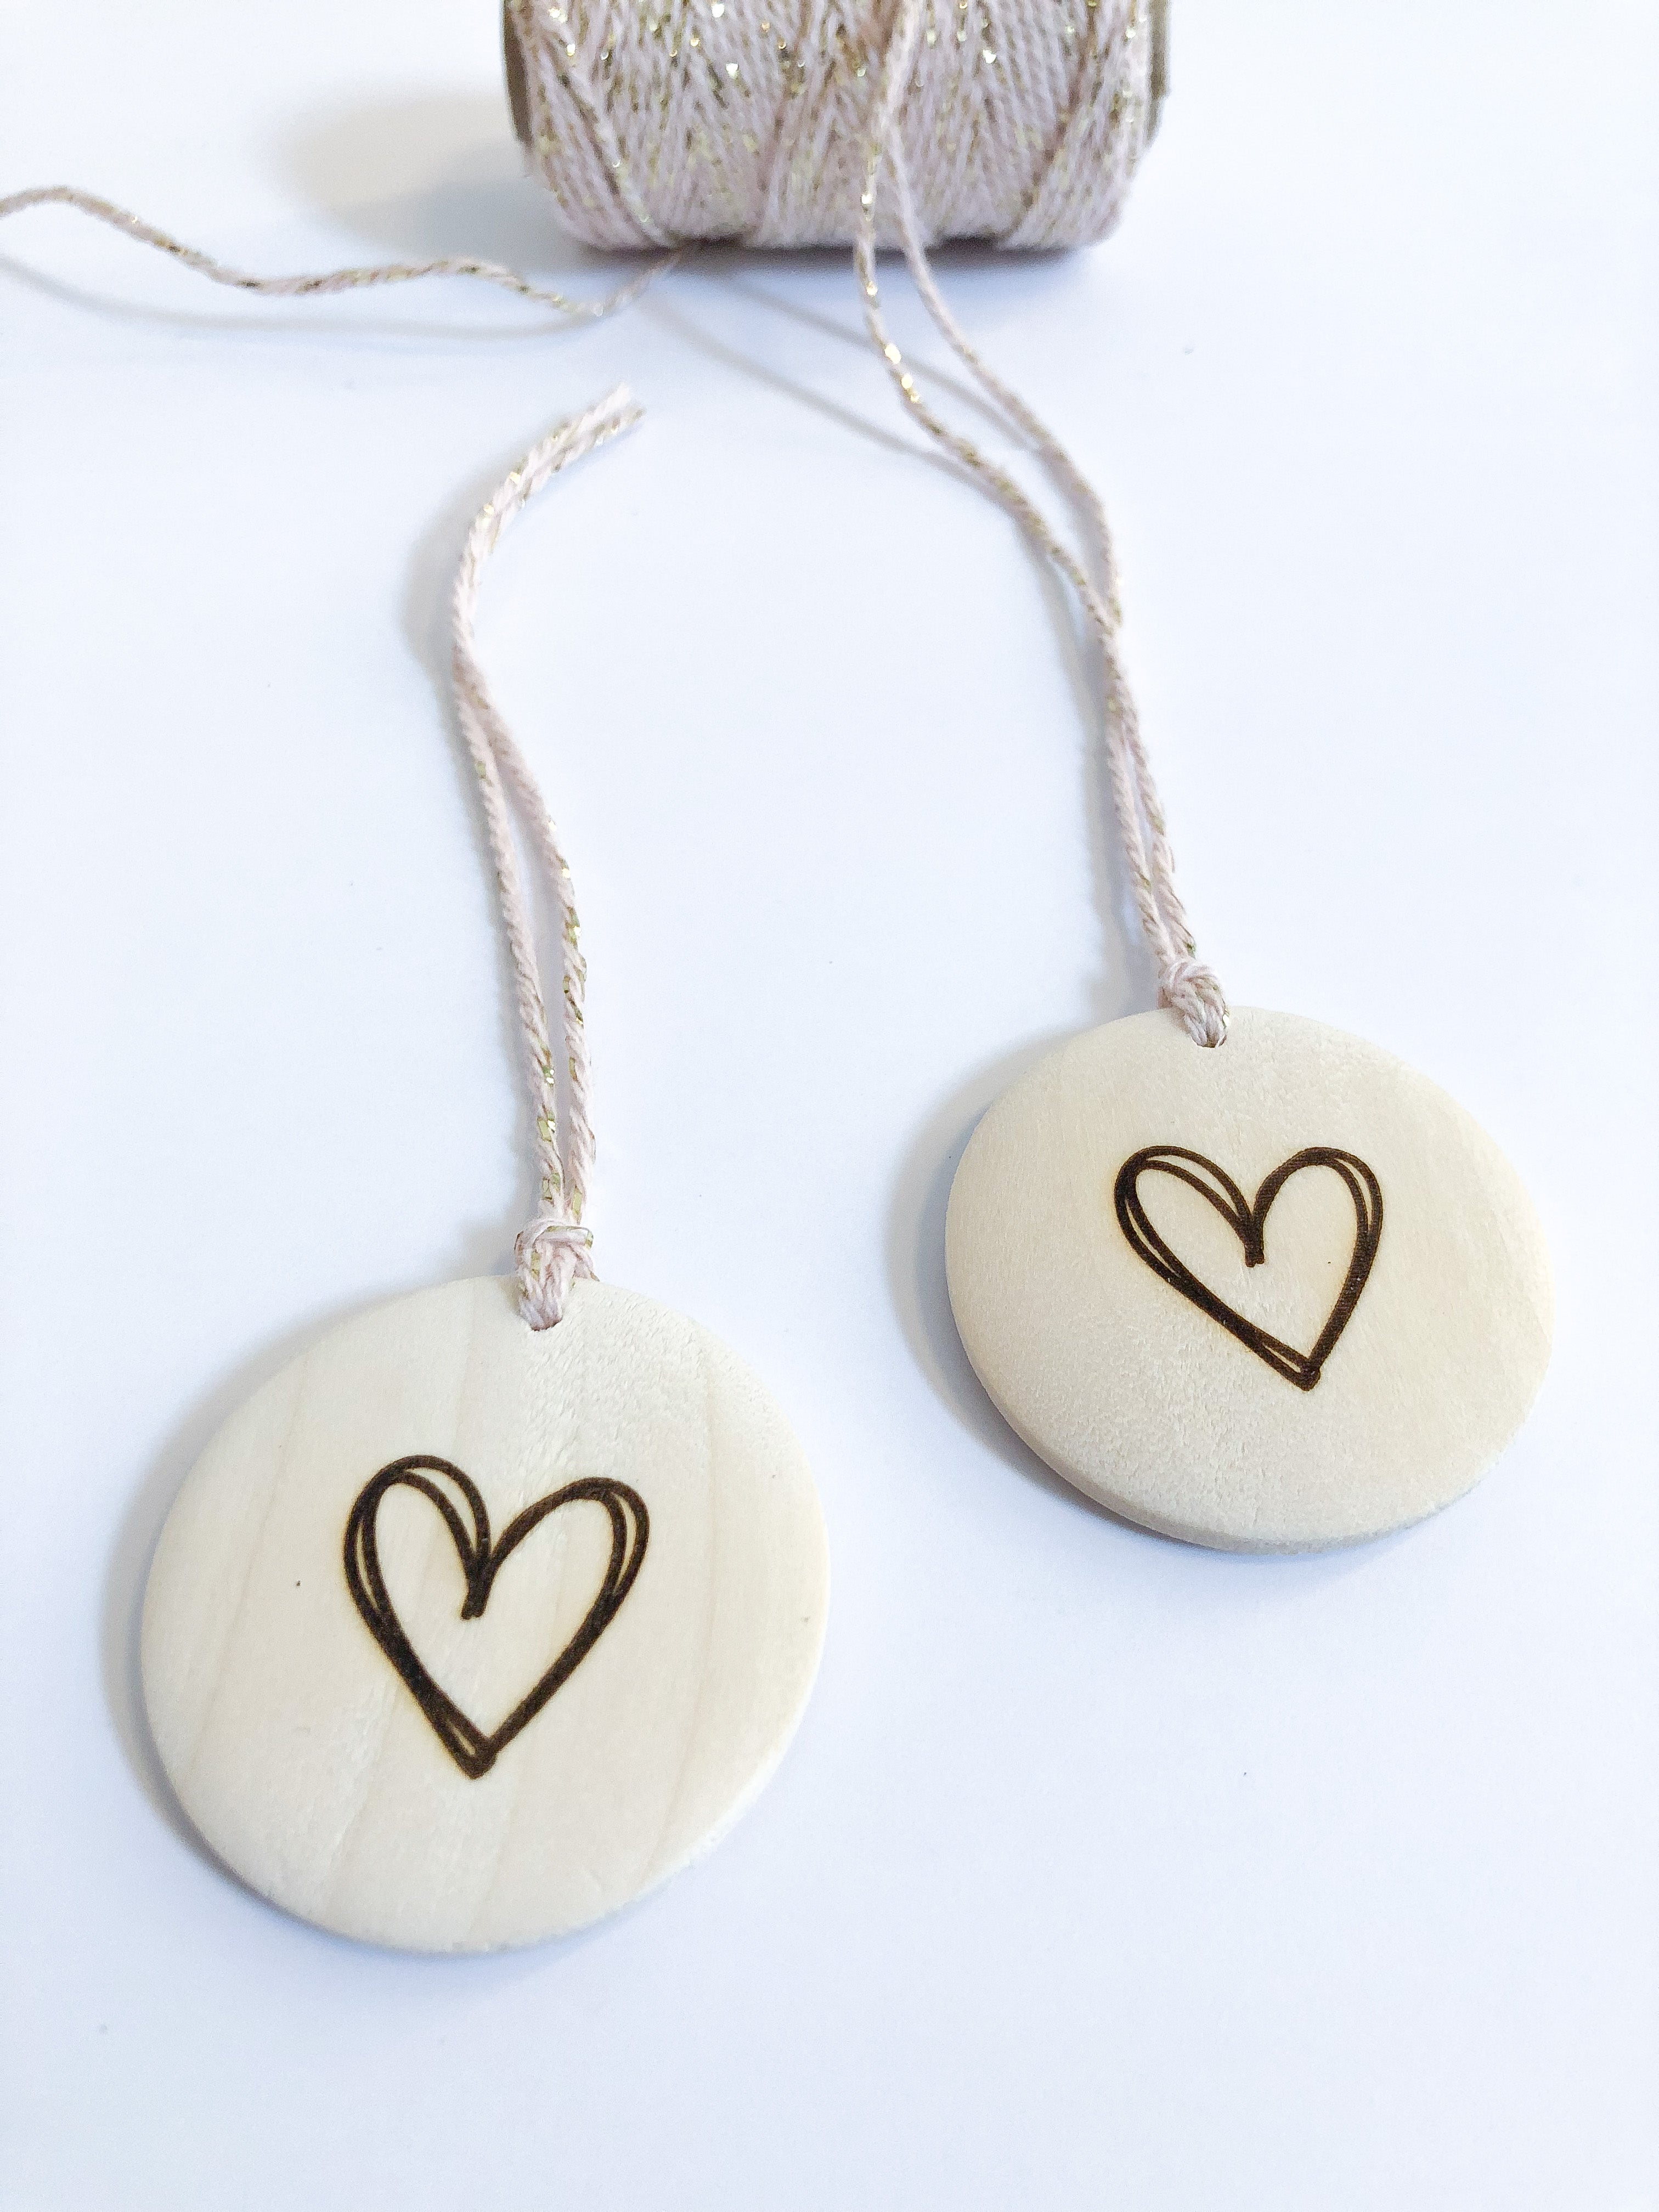 Wooden gift tag with engraved heart